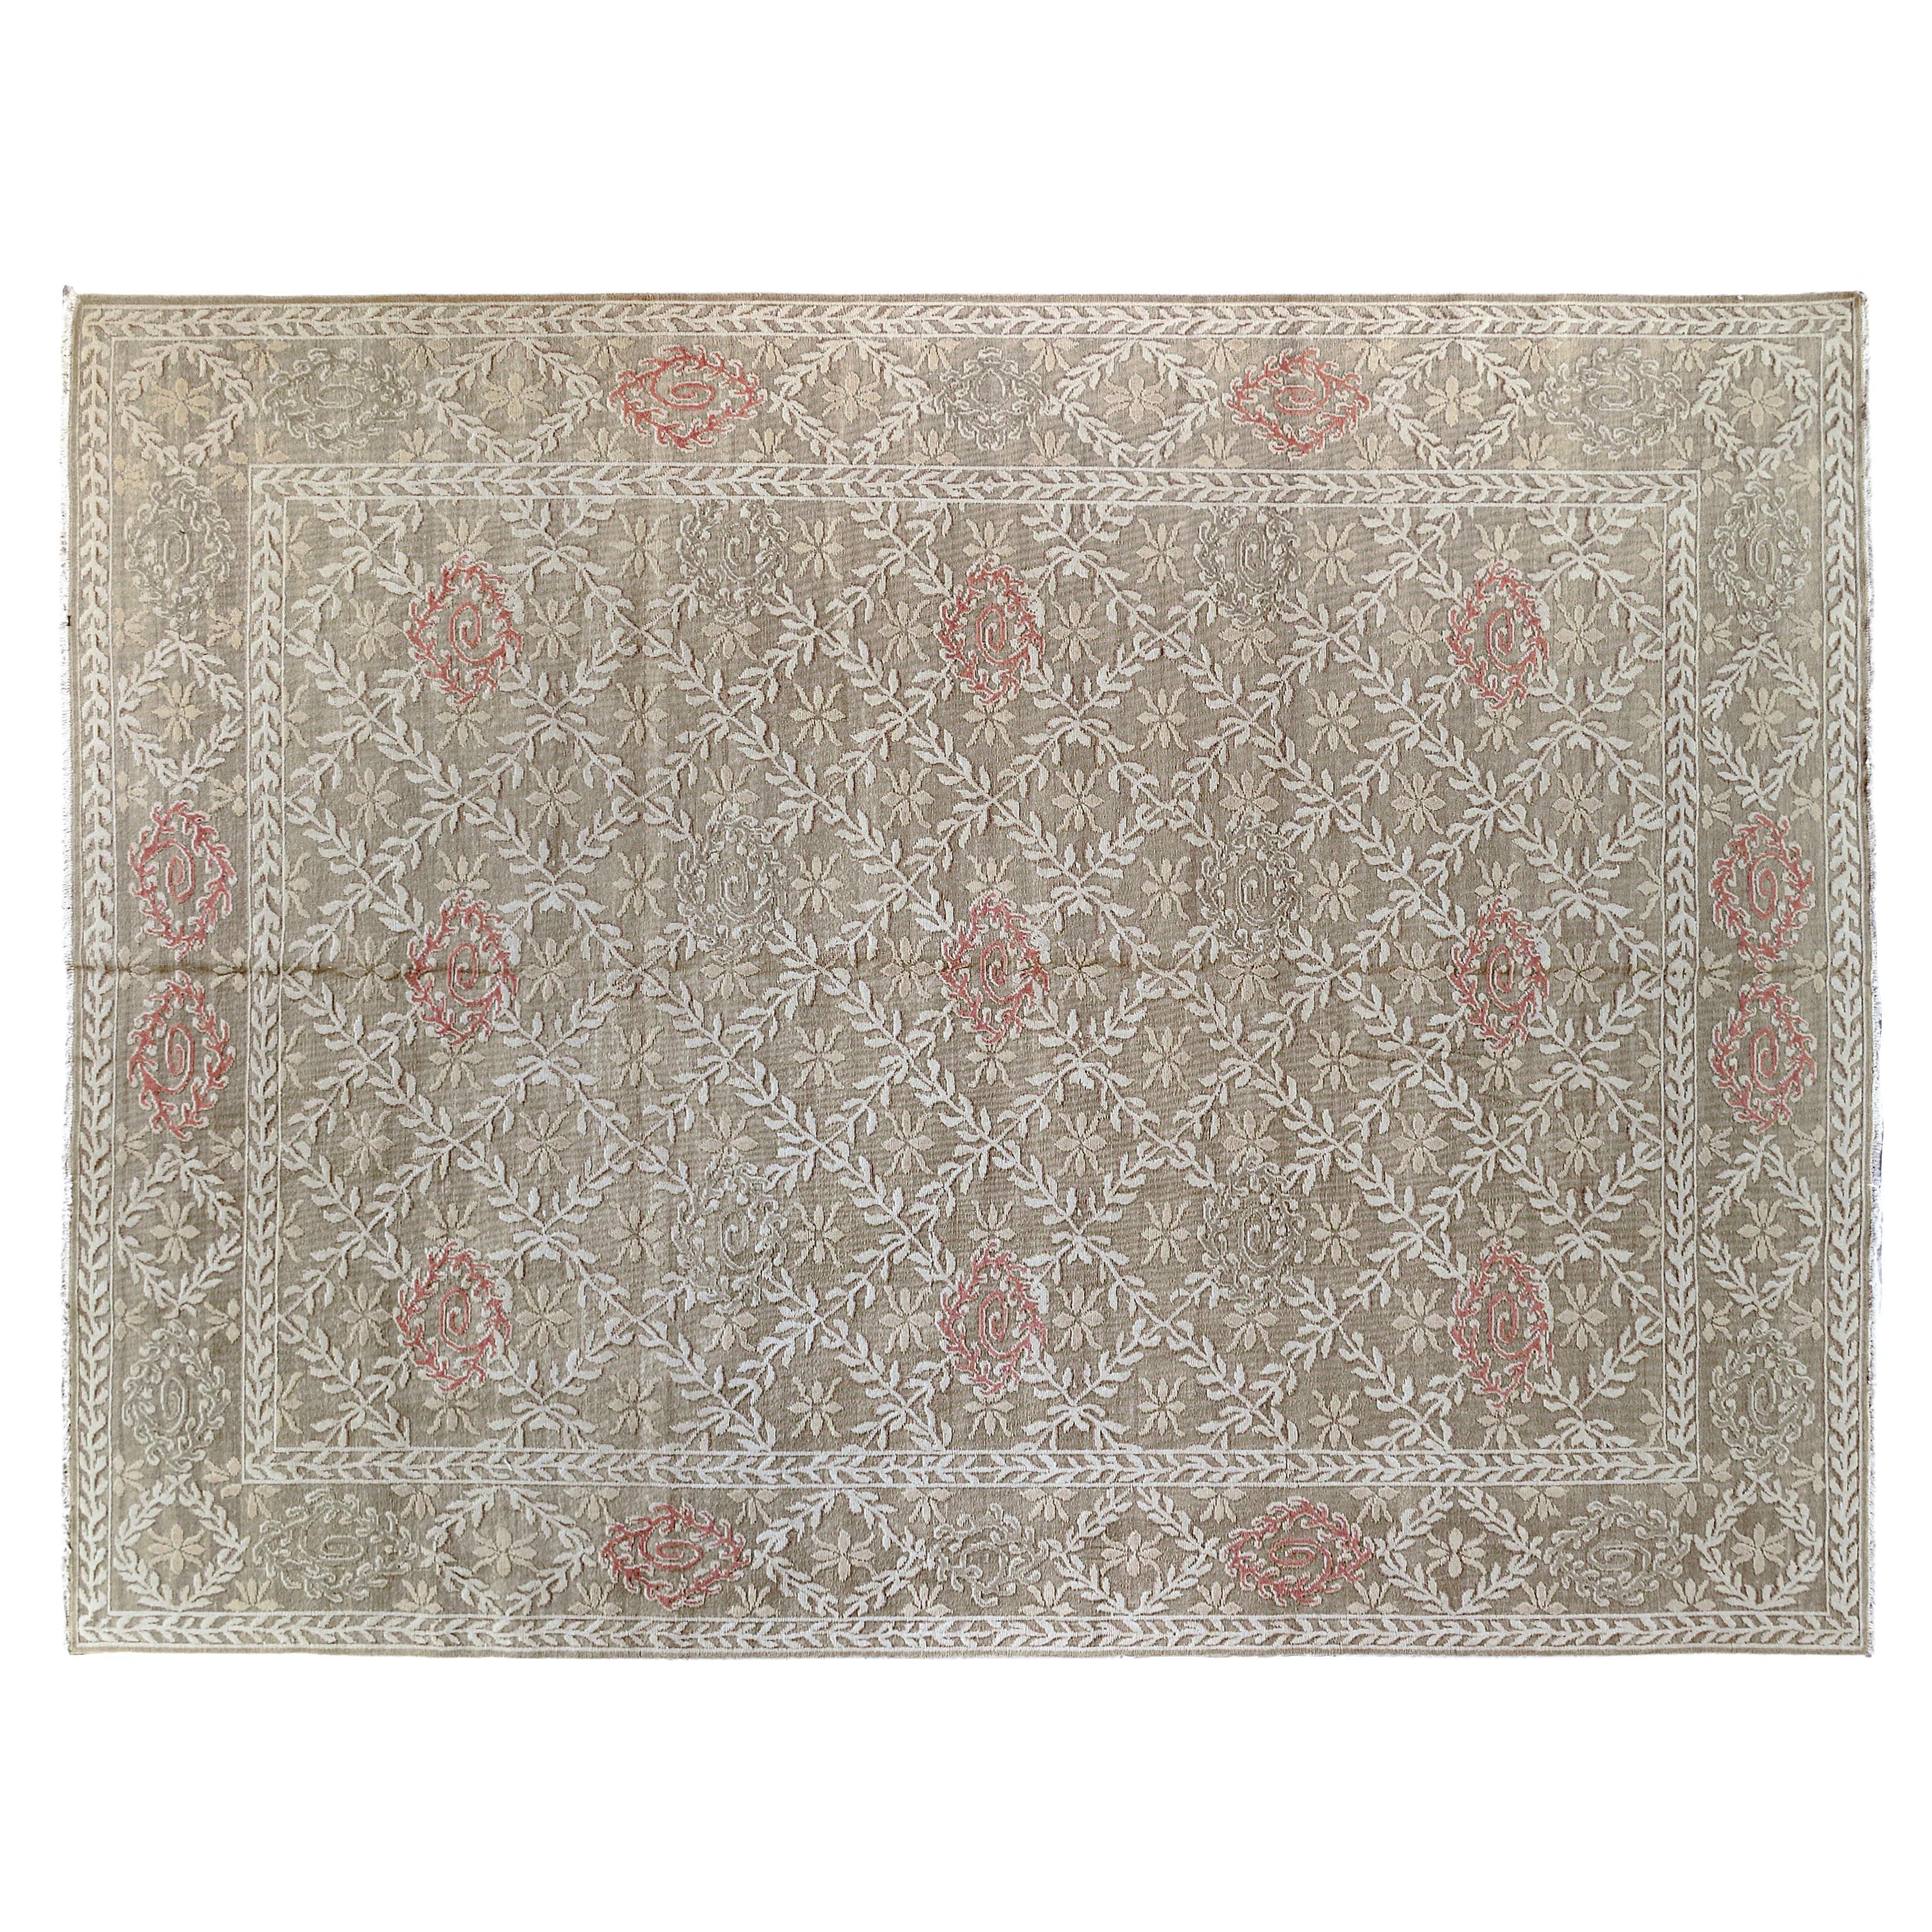 9'x12' French Floral Inspired Hand-Knotted Wool Rug